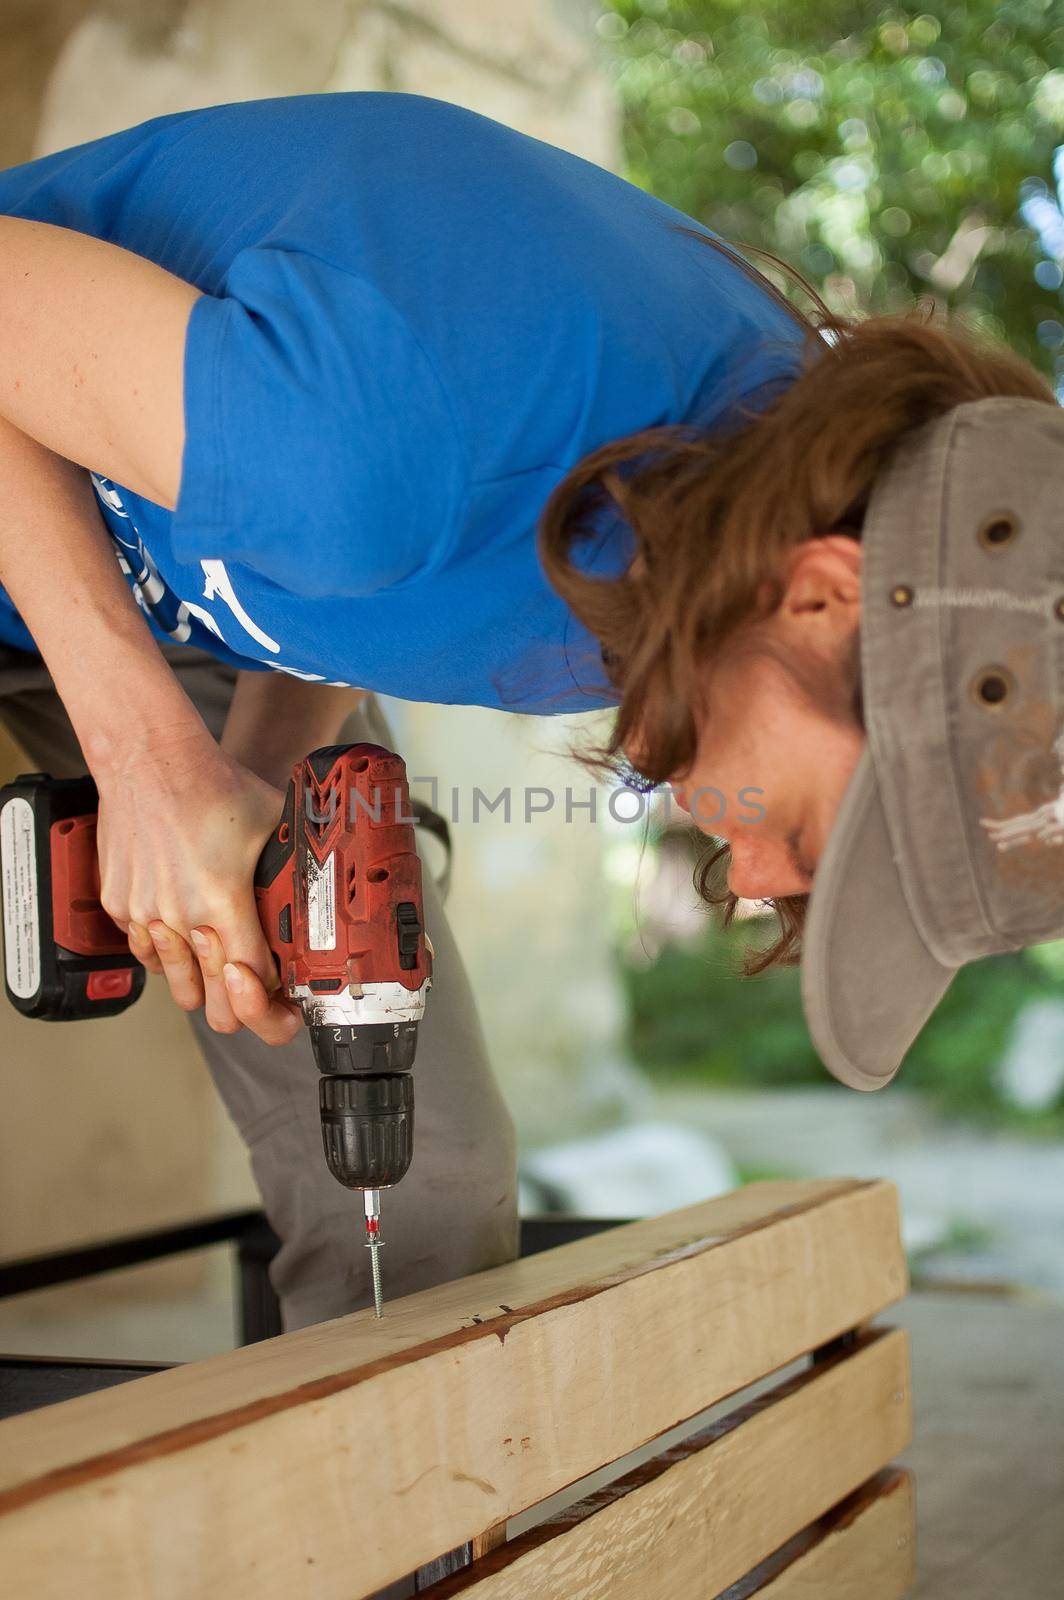 Skilled young female worker is using power screwdriver drilling during construction wooden bench gender equality, feminism, do it yourself concepts. by balinska_lv